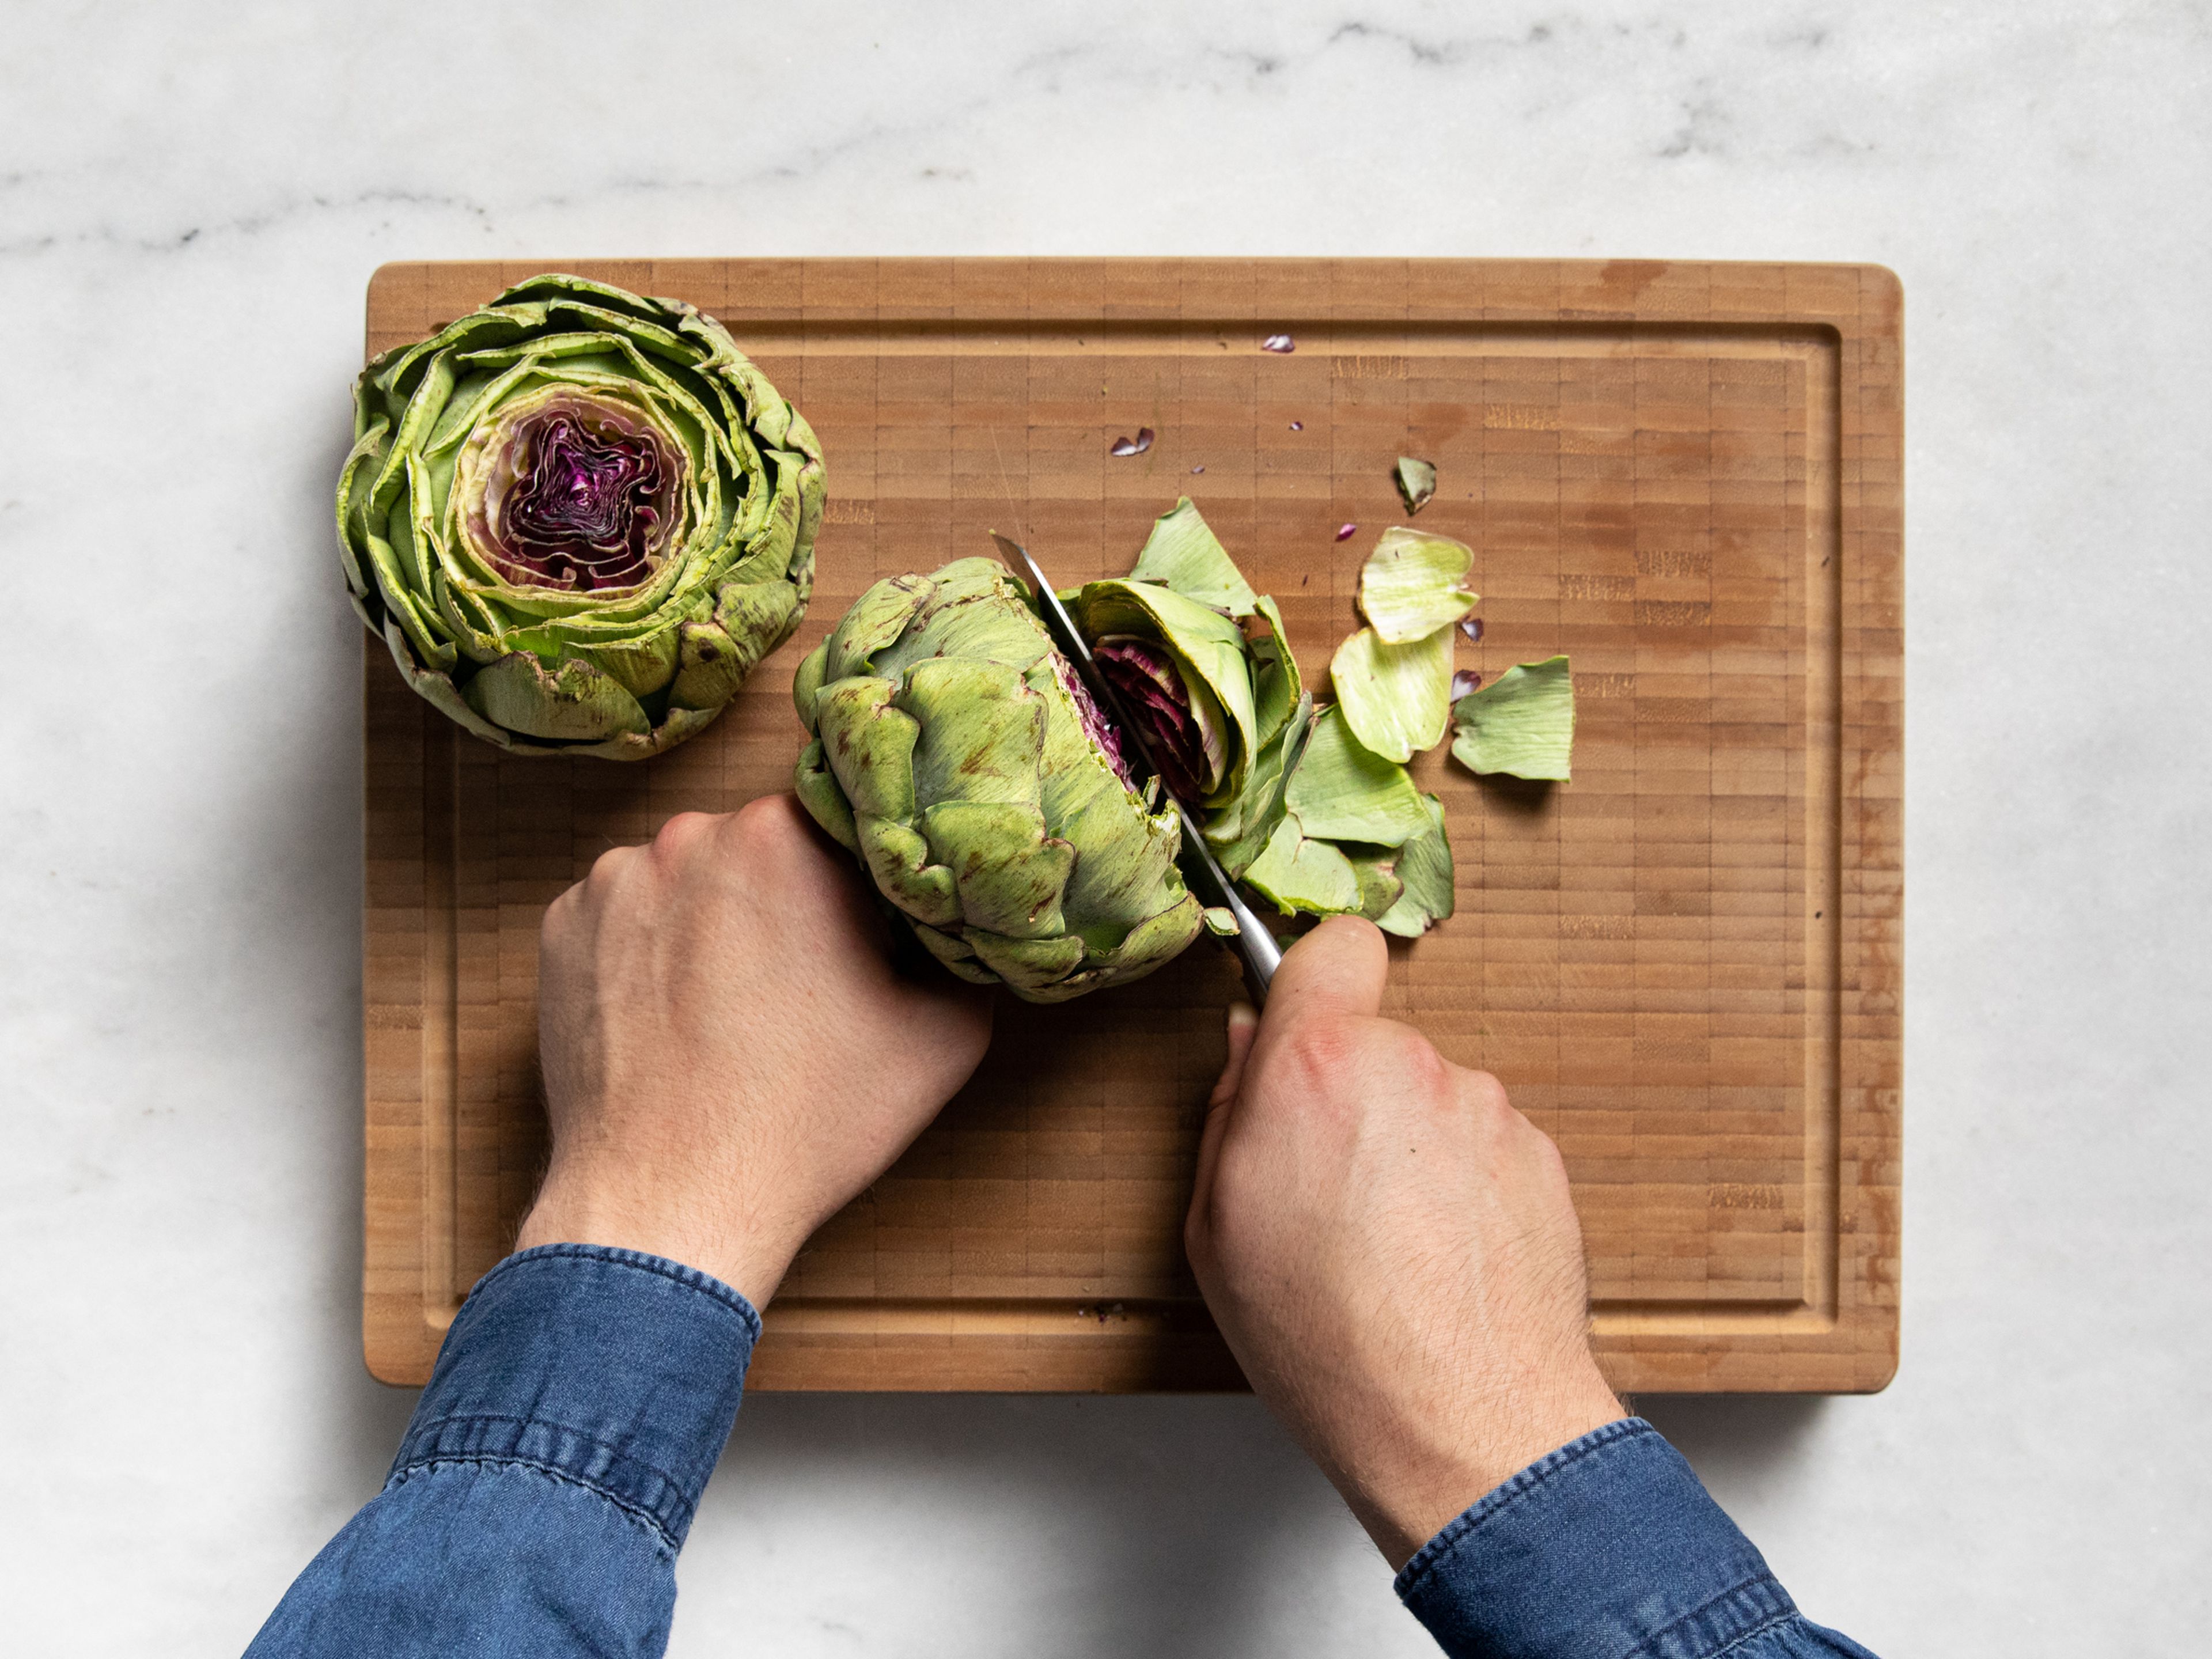 Bring a big pot with water and salt to a boil. To prepare the artichokes, cut off about 2 cm/1 in. from both the stem and top with a serrated knife.